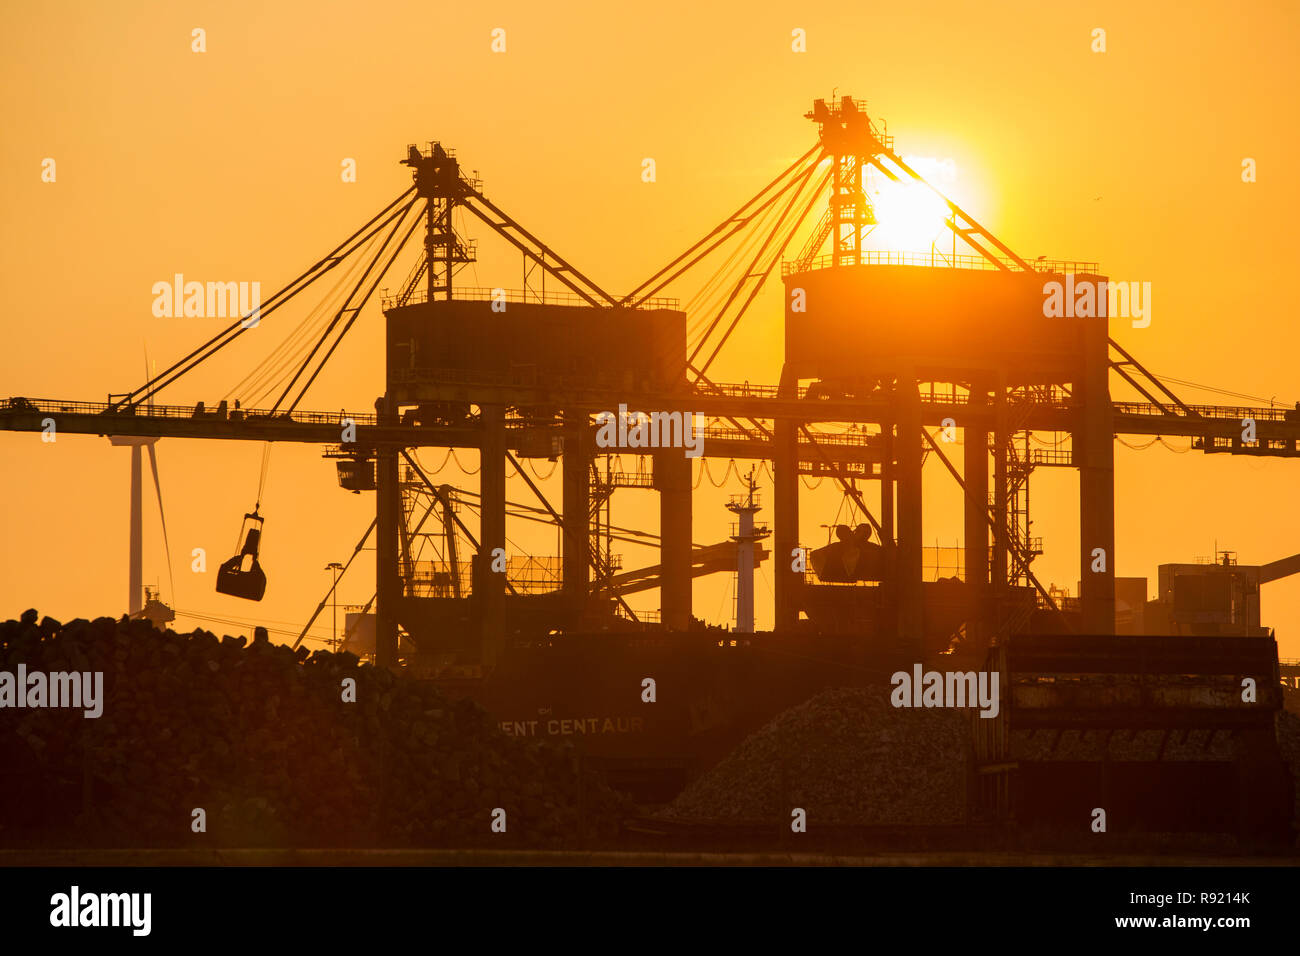 Silhouetted cranes unloading coal at sunset by the Tata steel works in Ijmuiden, North Holland, Netherlands Stock Photo